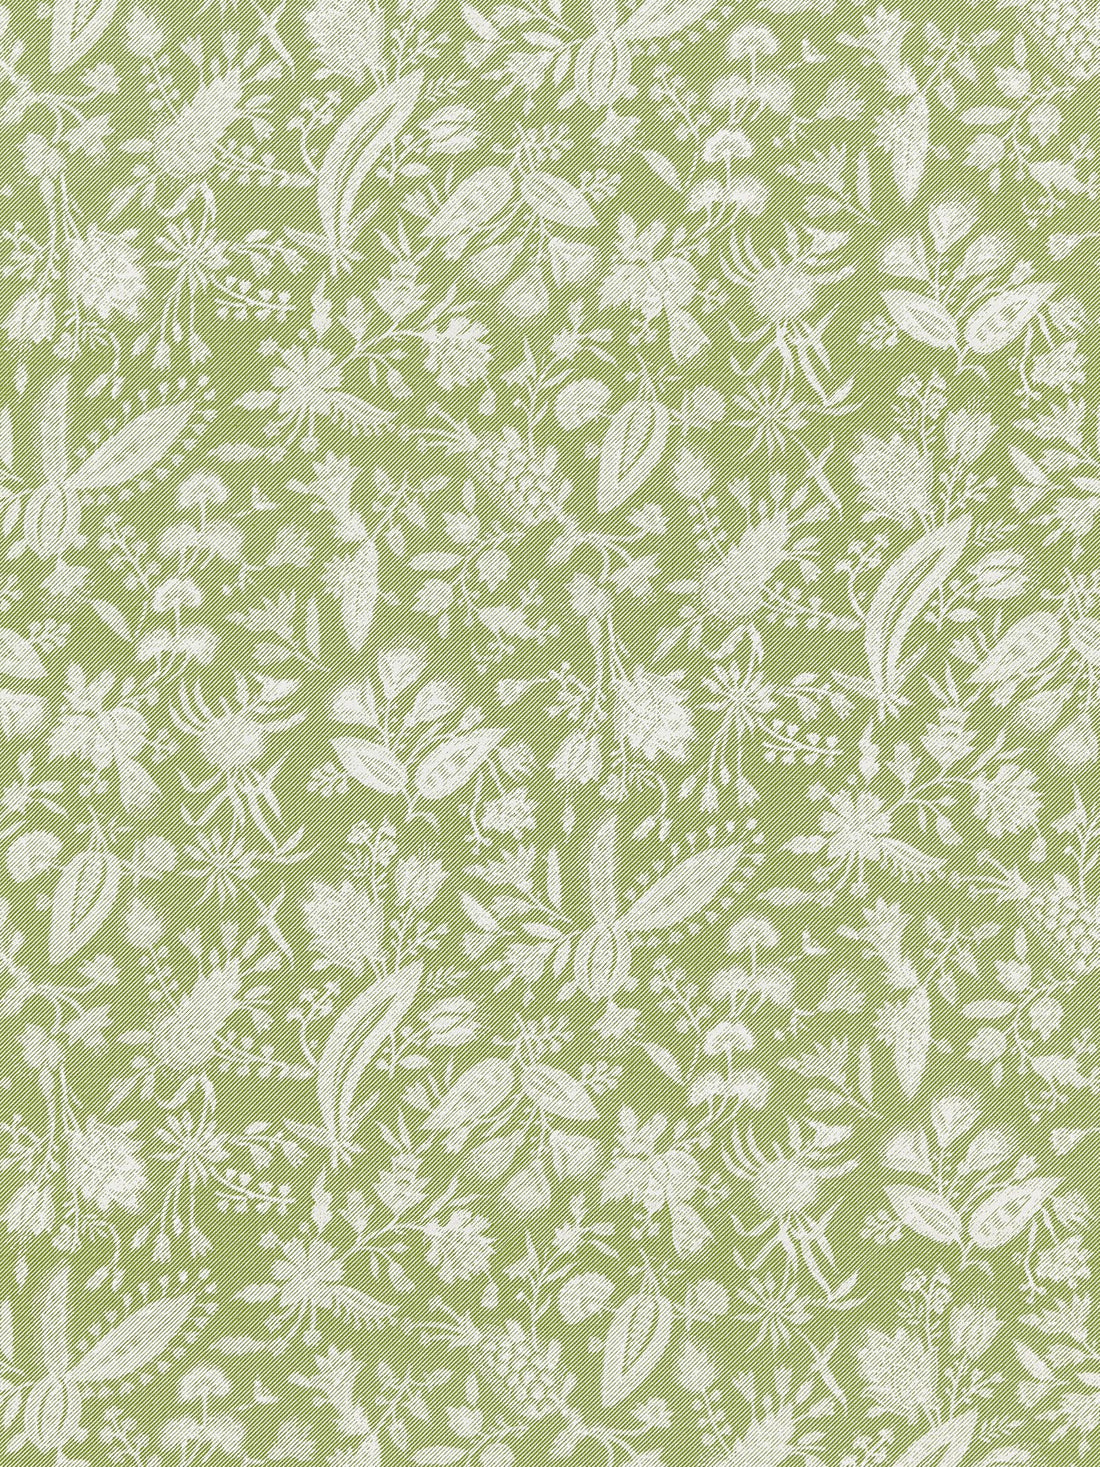 Tulia Linen Print fabric in willow color - pattern number SC 000216605 - by Scalamandre in the Scalamandre Fabrics Book 1 collection